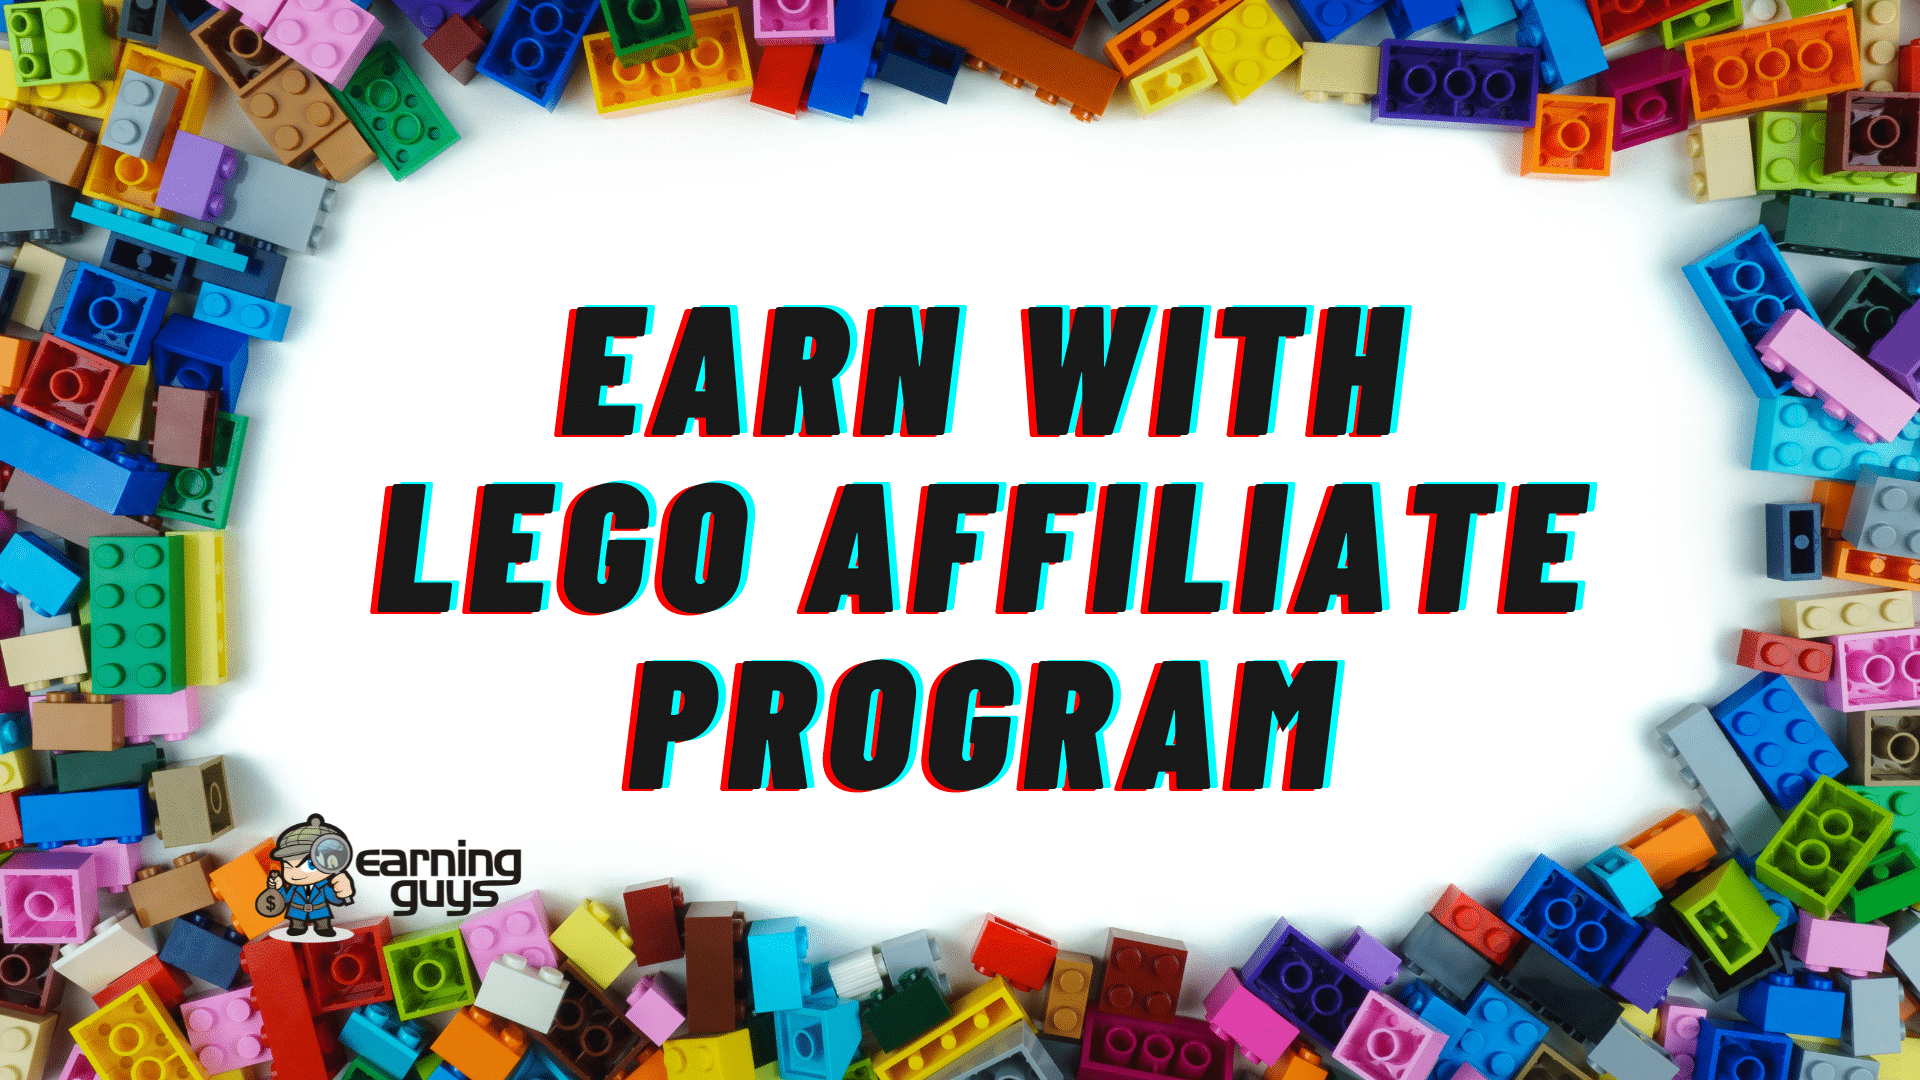 How to Earn with Lego Affiliate Program?